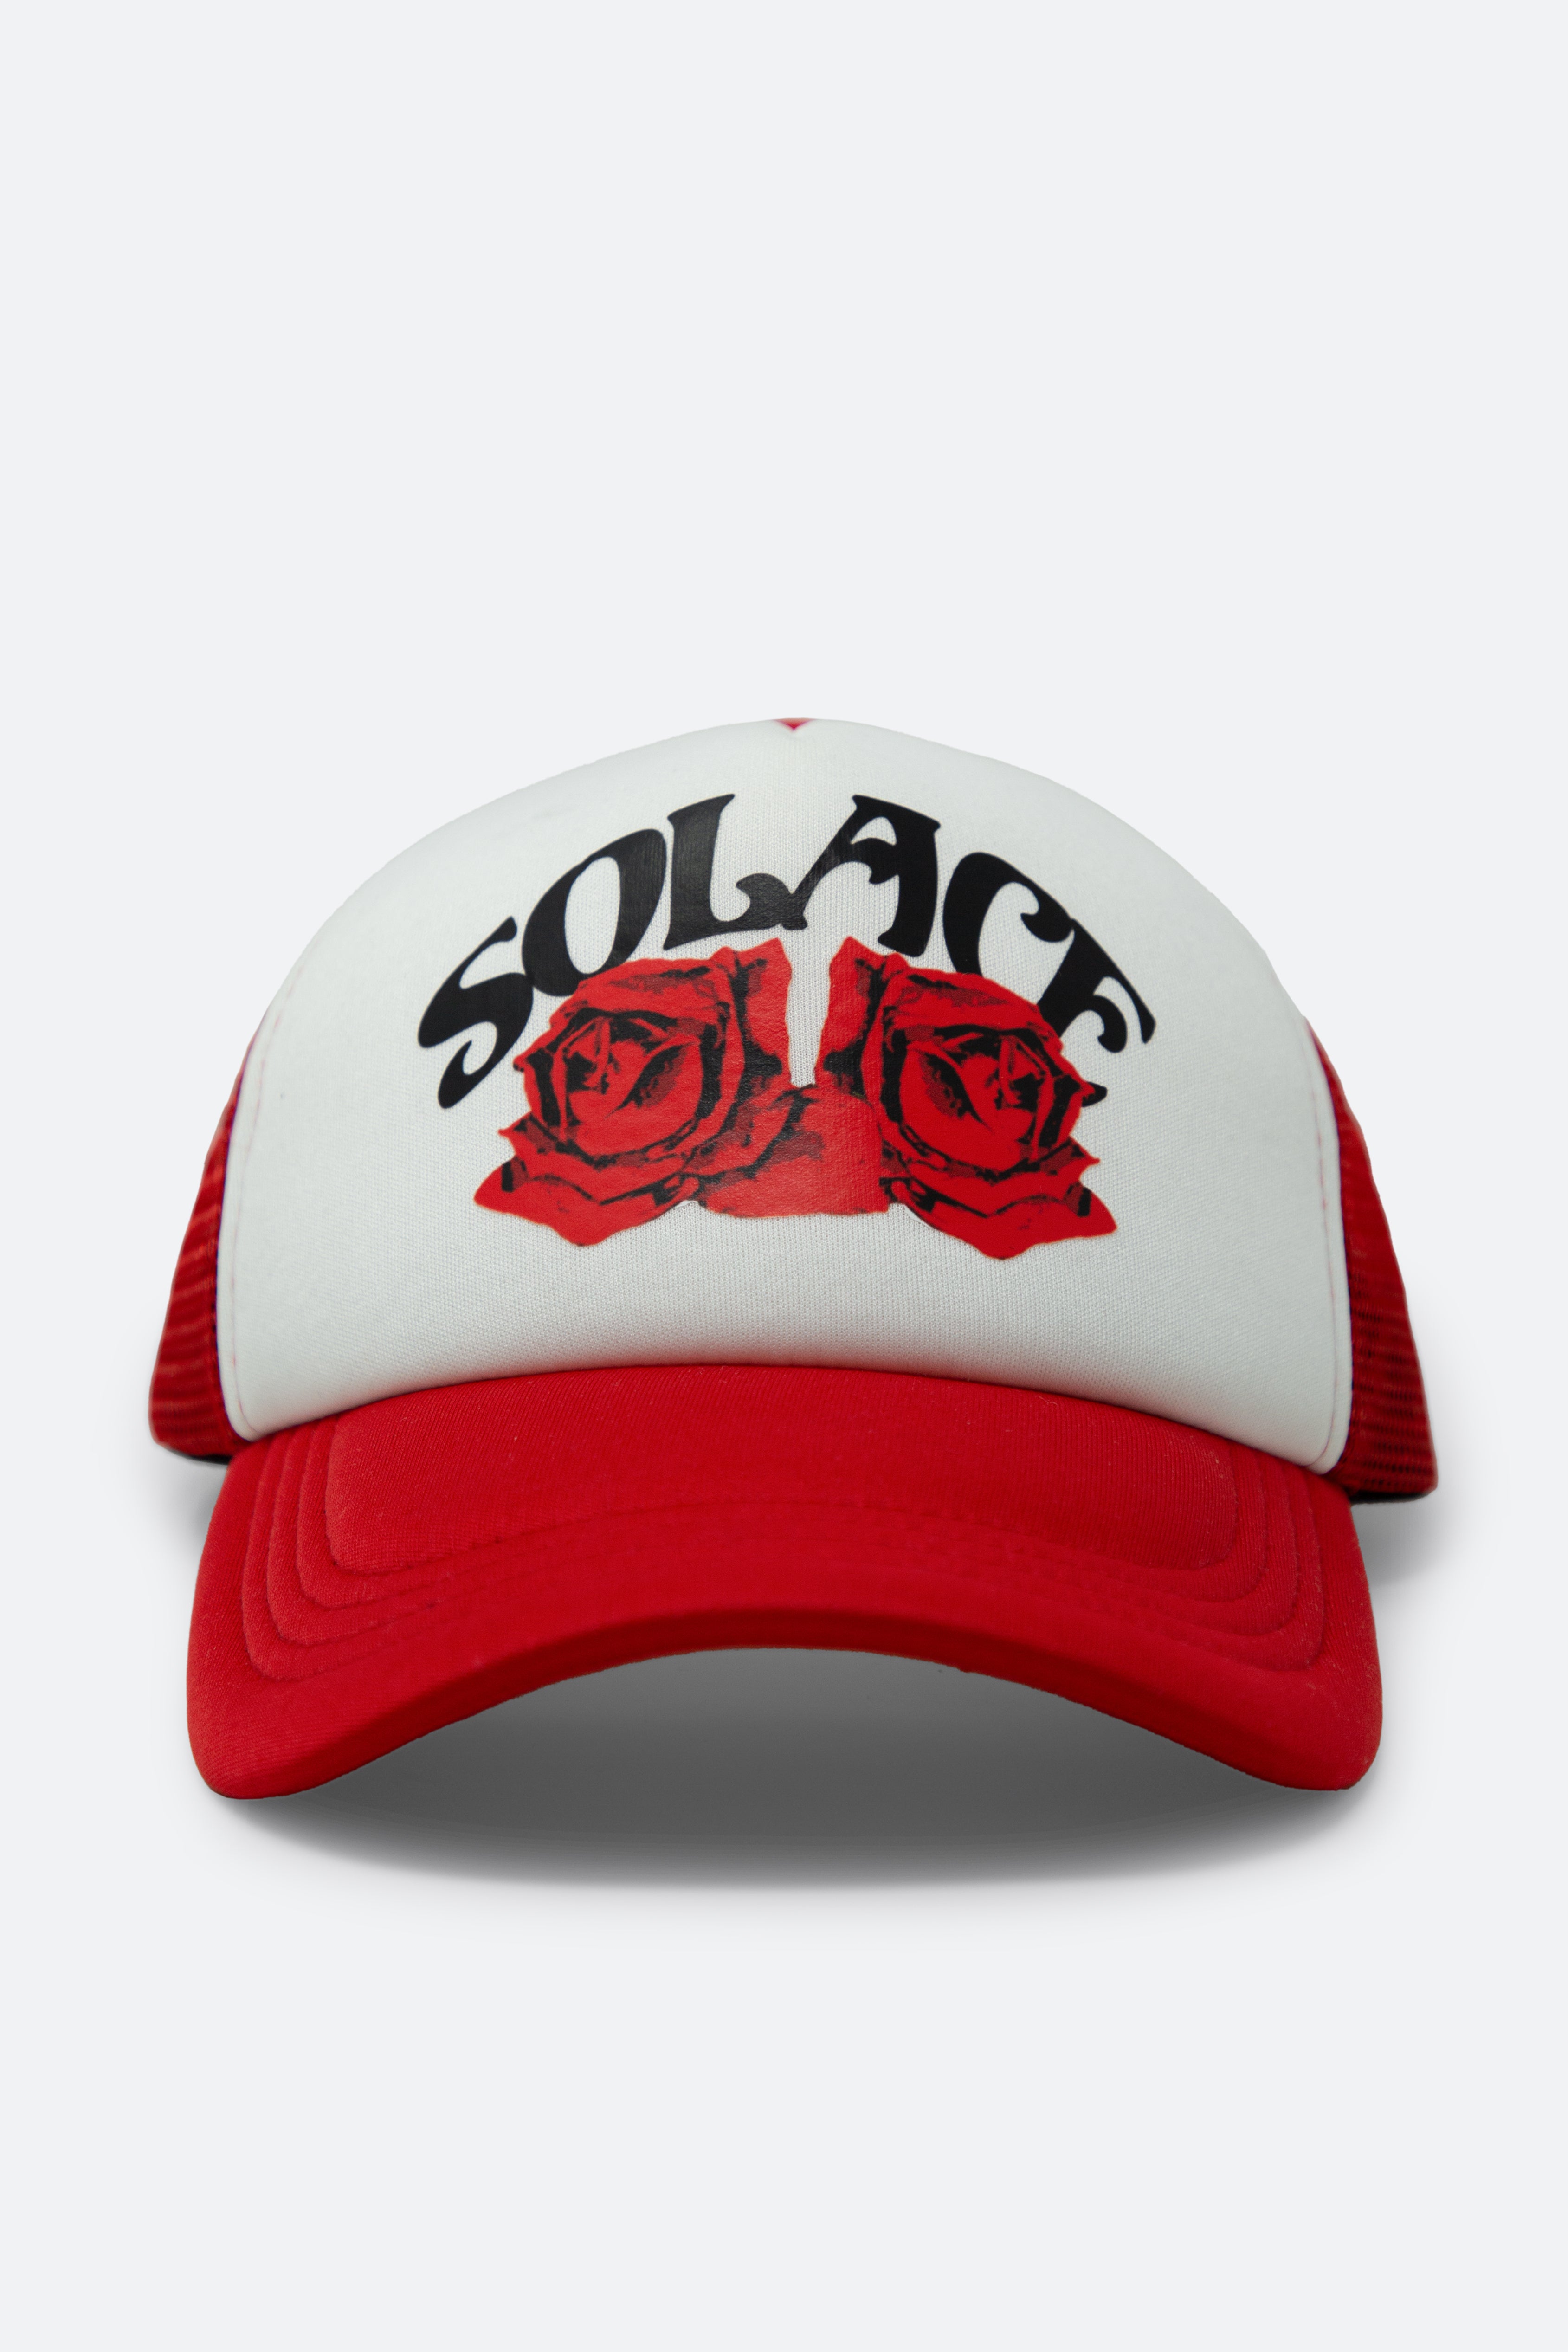 Solace Trucker Cap - Red/White